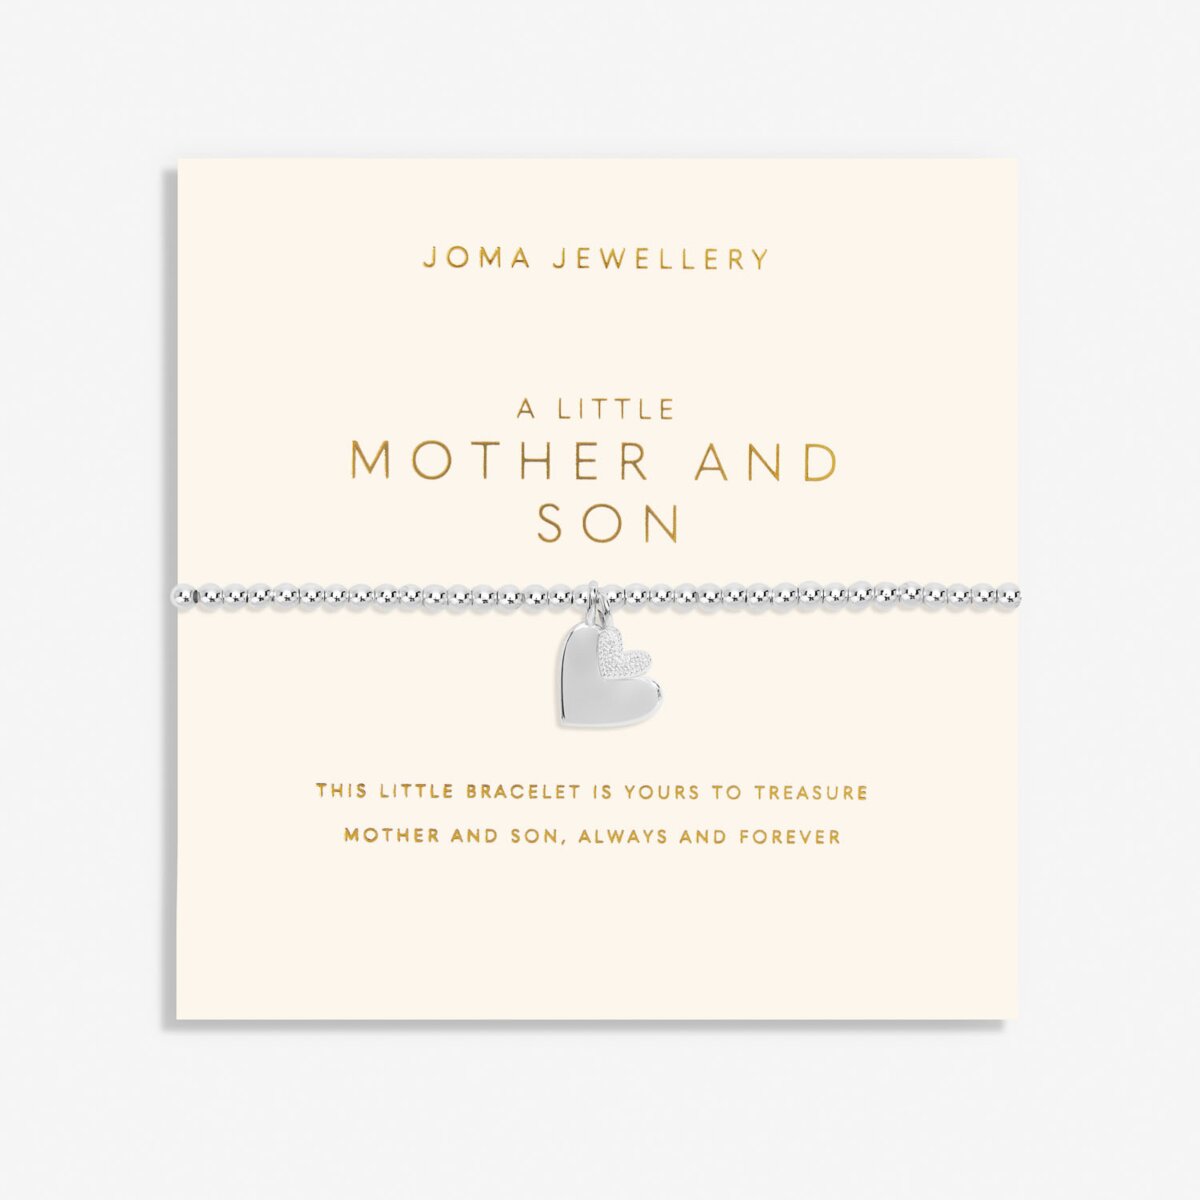 JOMA JEWELLERY | MOTHER'S DAY A LITTLE | MOTHER AND SON BRACELET